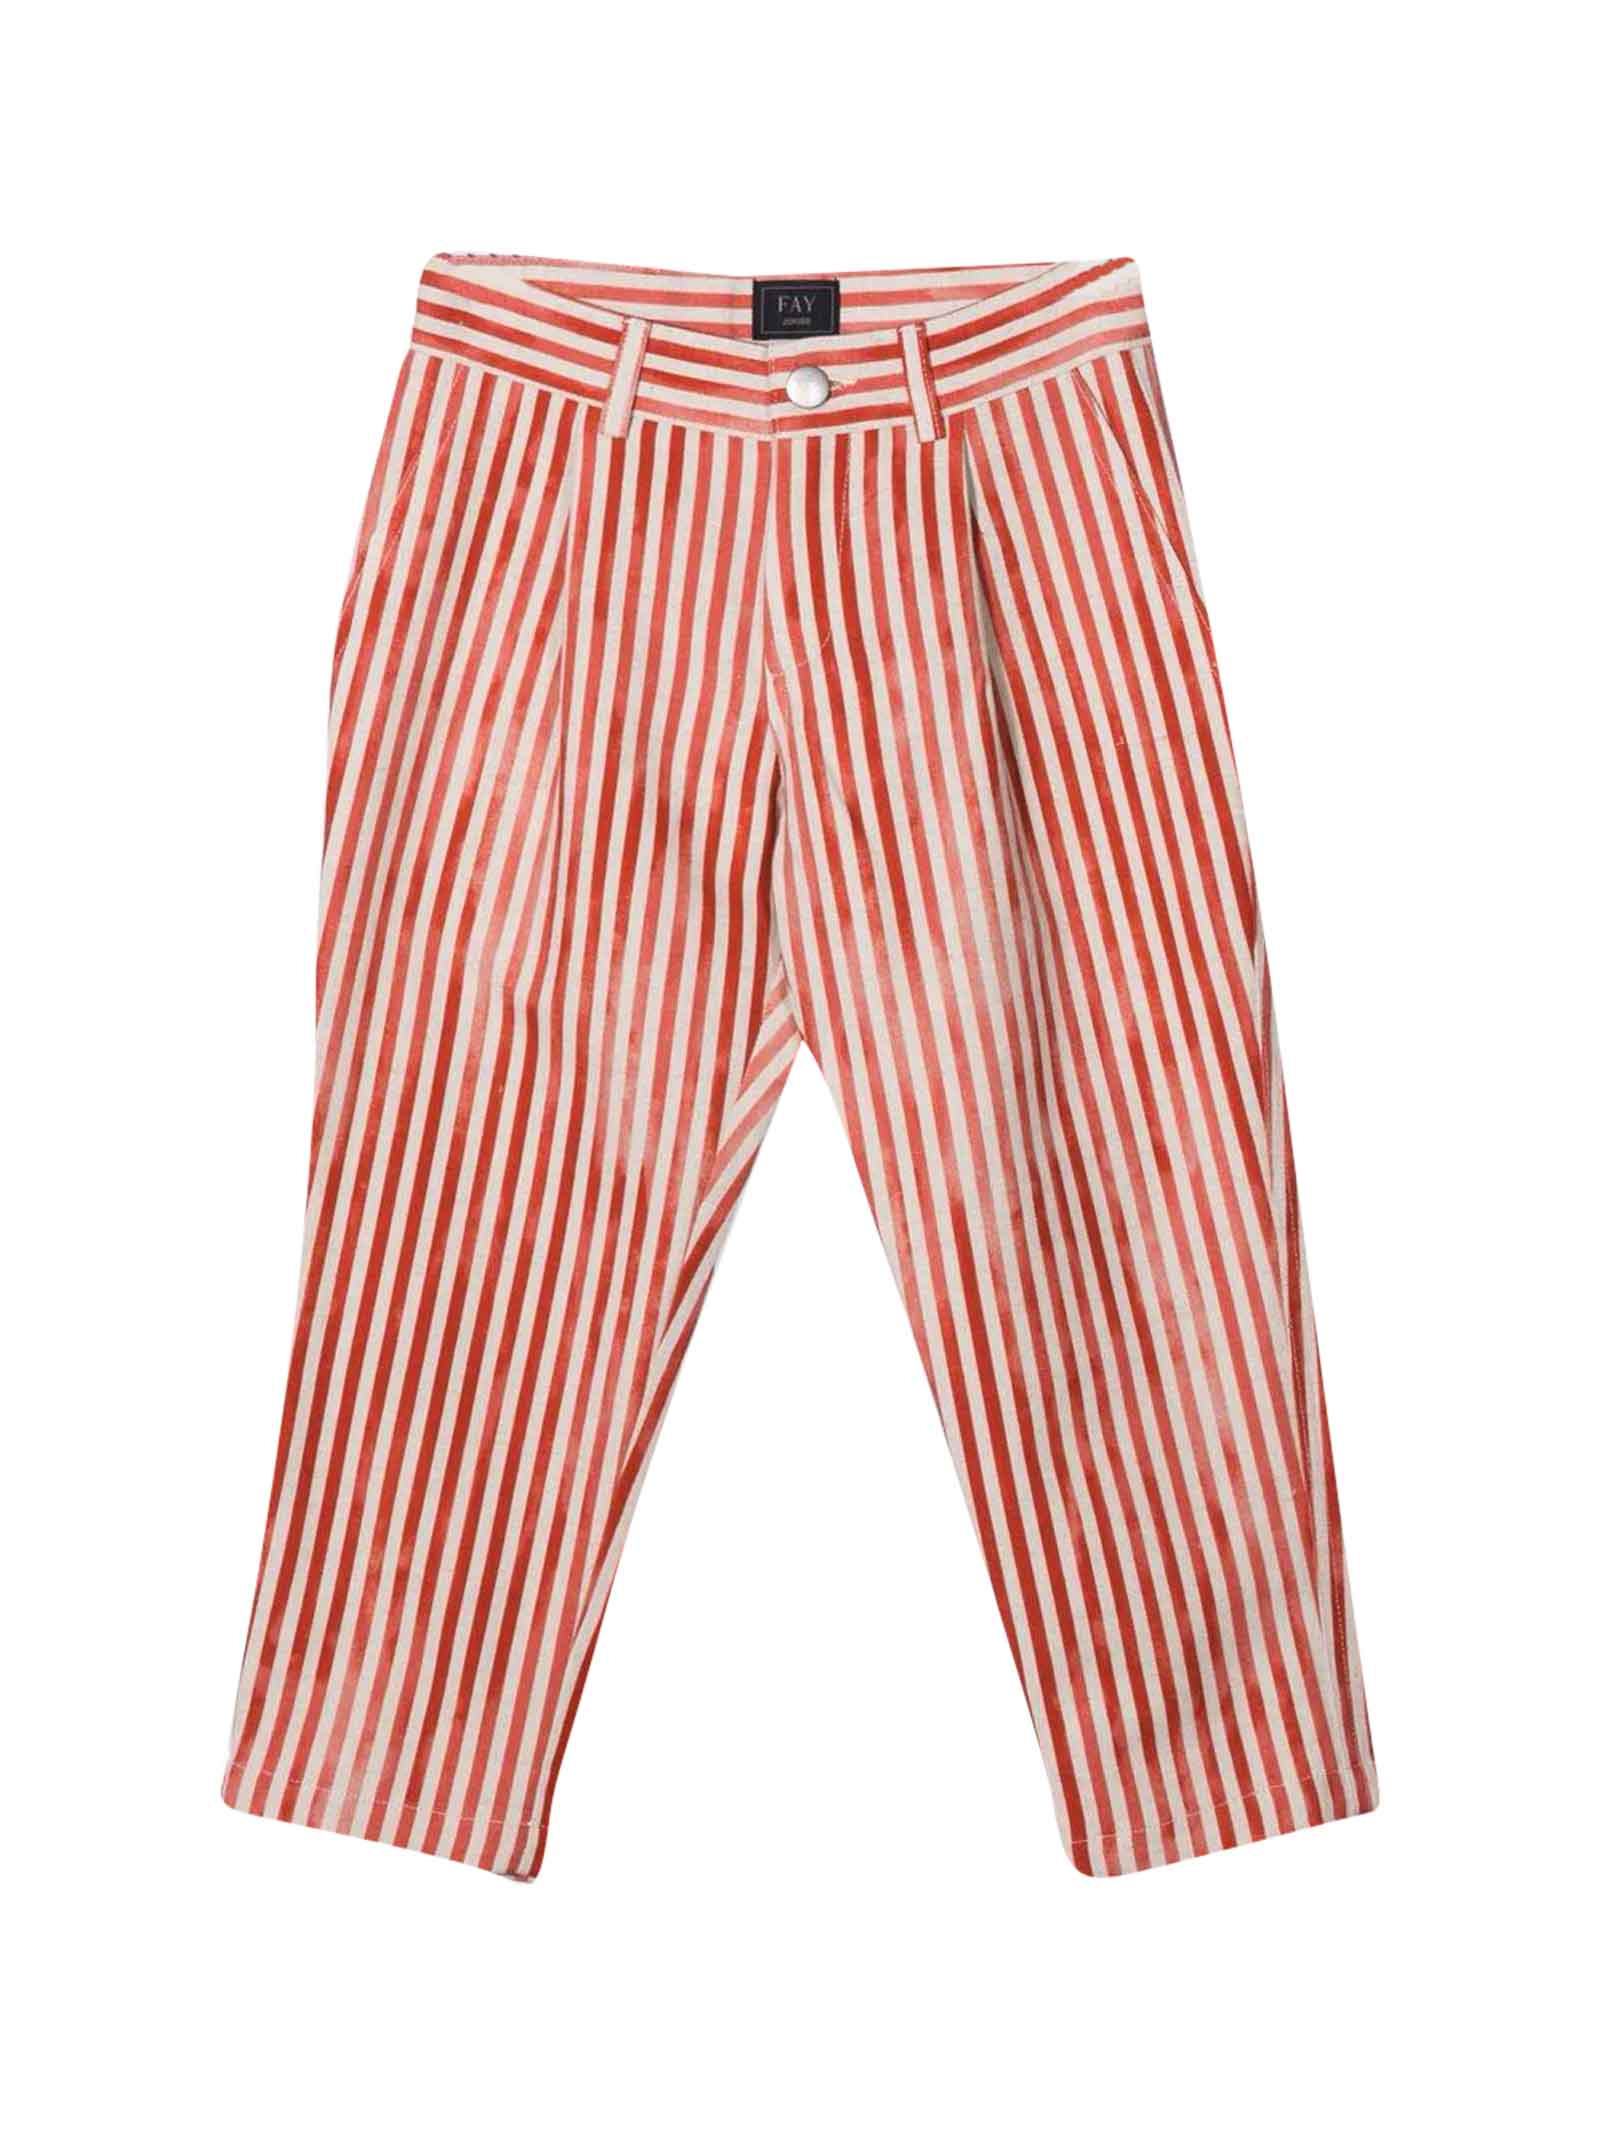 FAY STRIPED TROUSERS